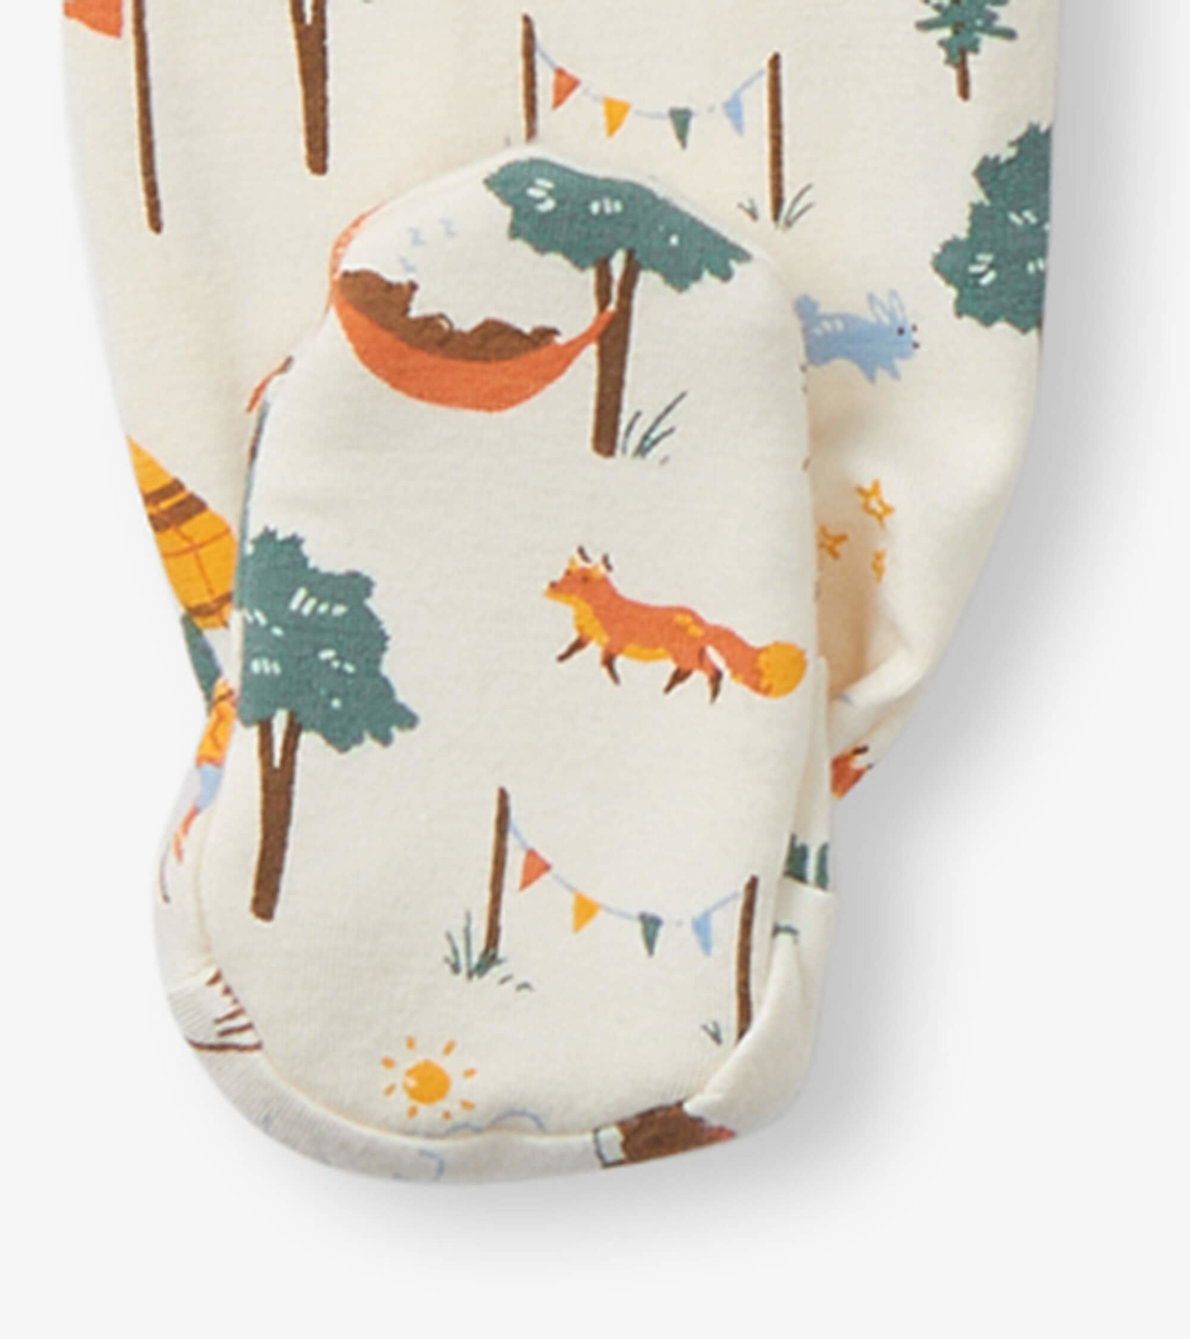 View larger image of Camping Animals Newborn Zip-Up Footed Sleeper